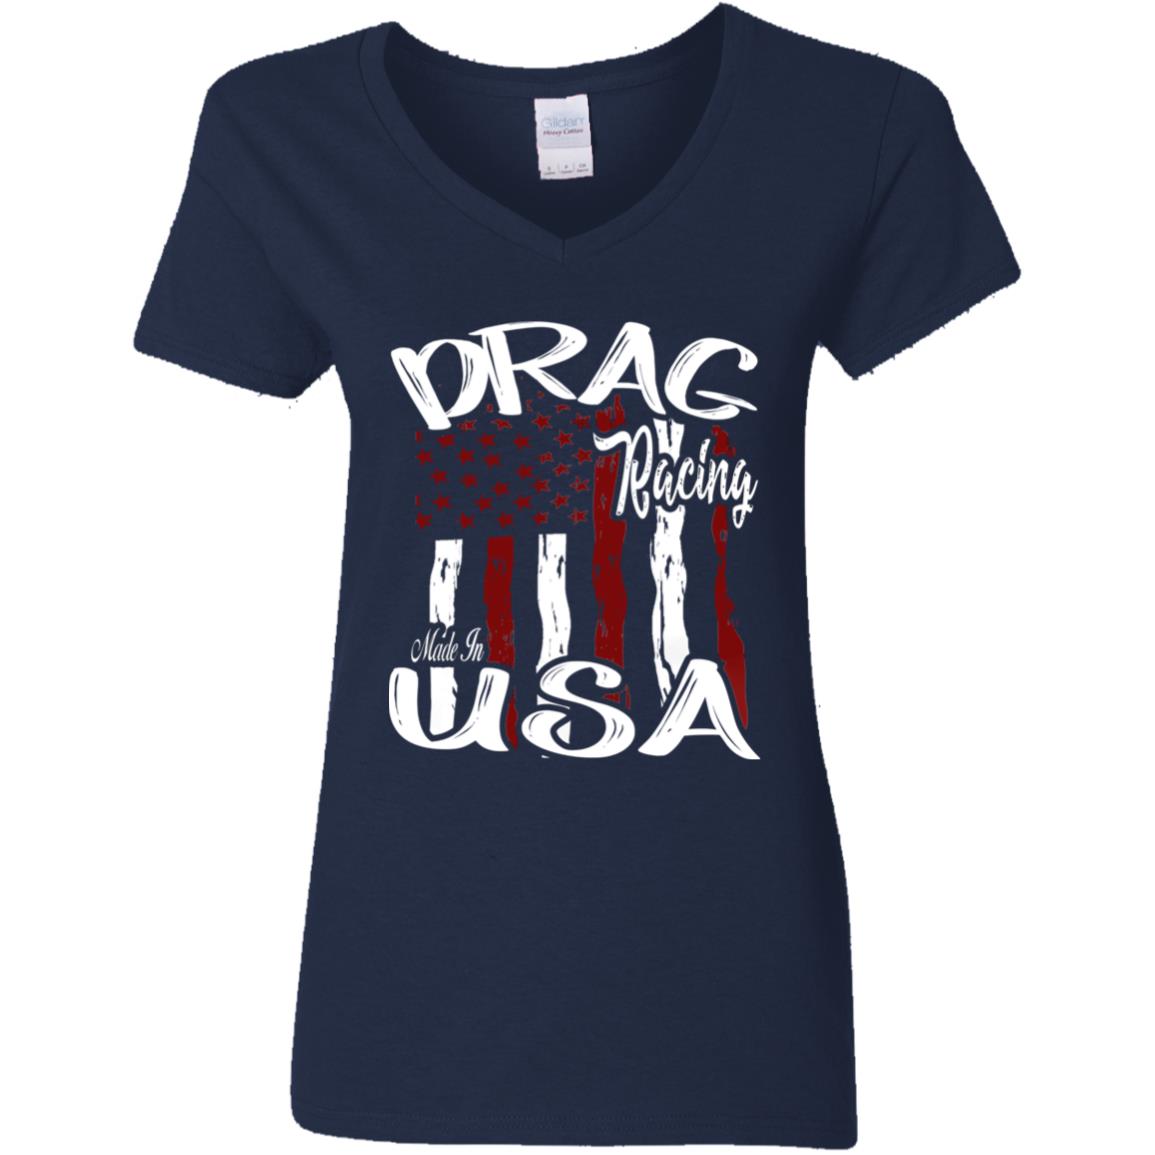 Drag Racing Made In USA Ladies' 5.3 oz. V-Neck T-Shirt